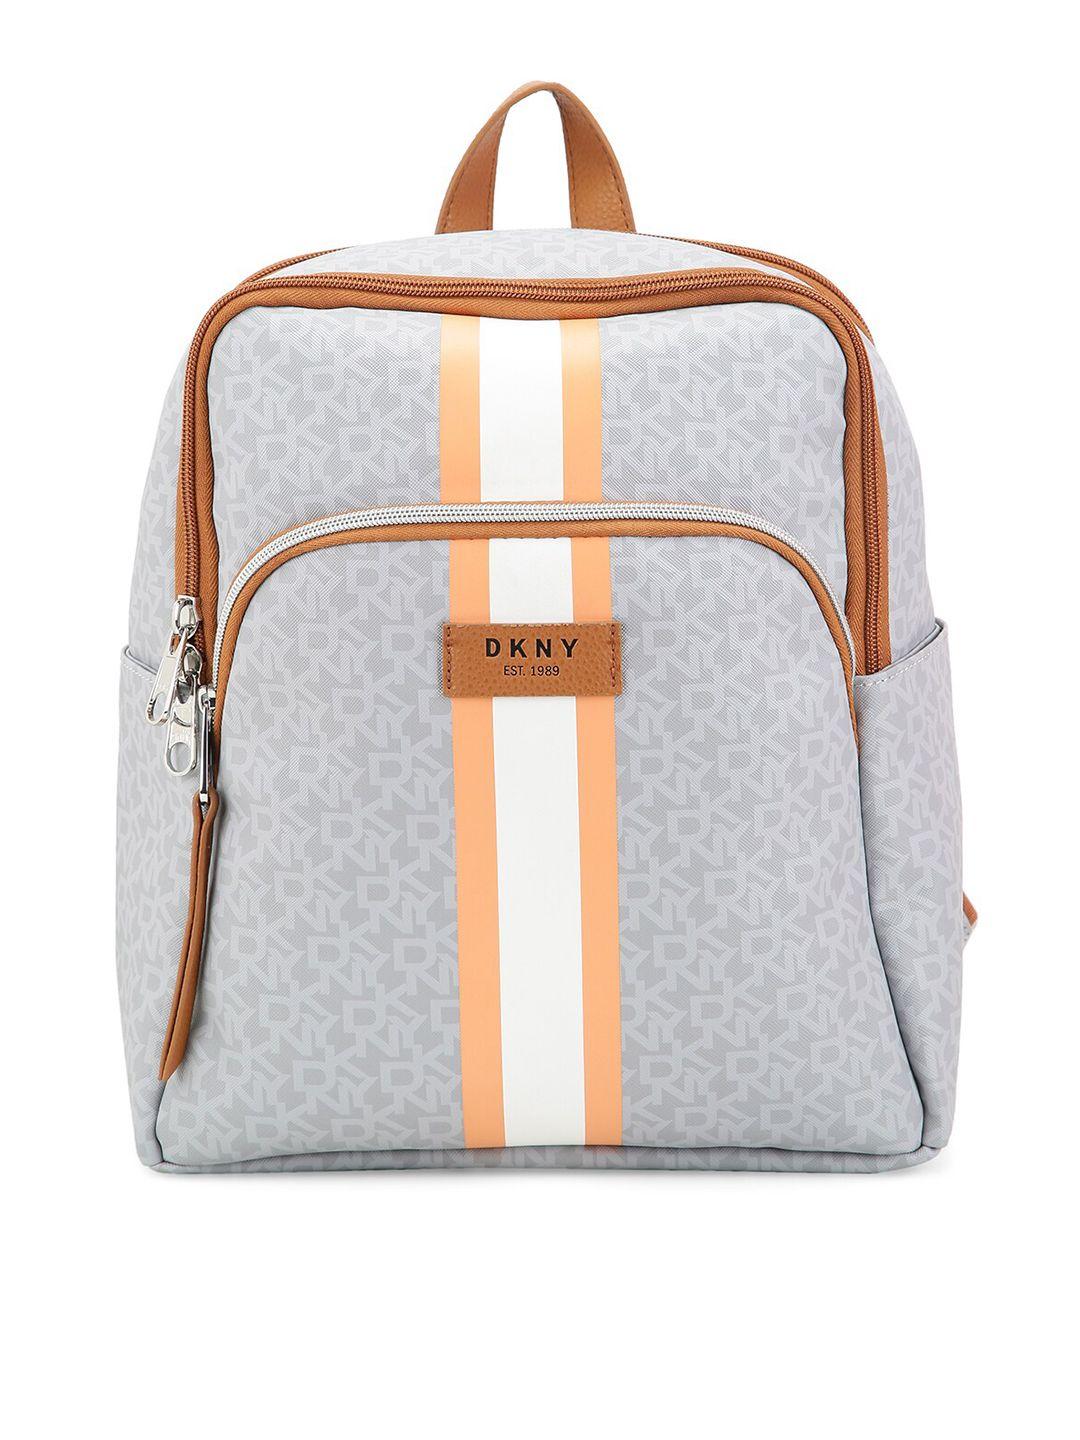 dkny graphic printed backpack